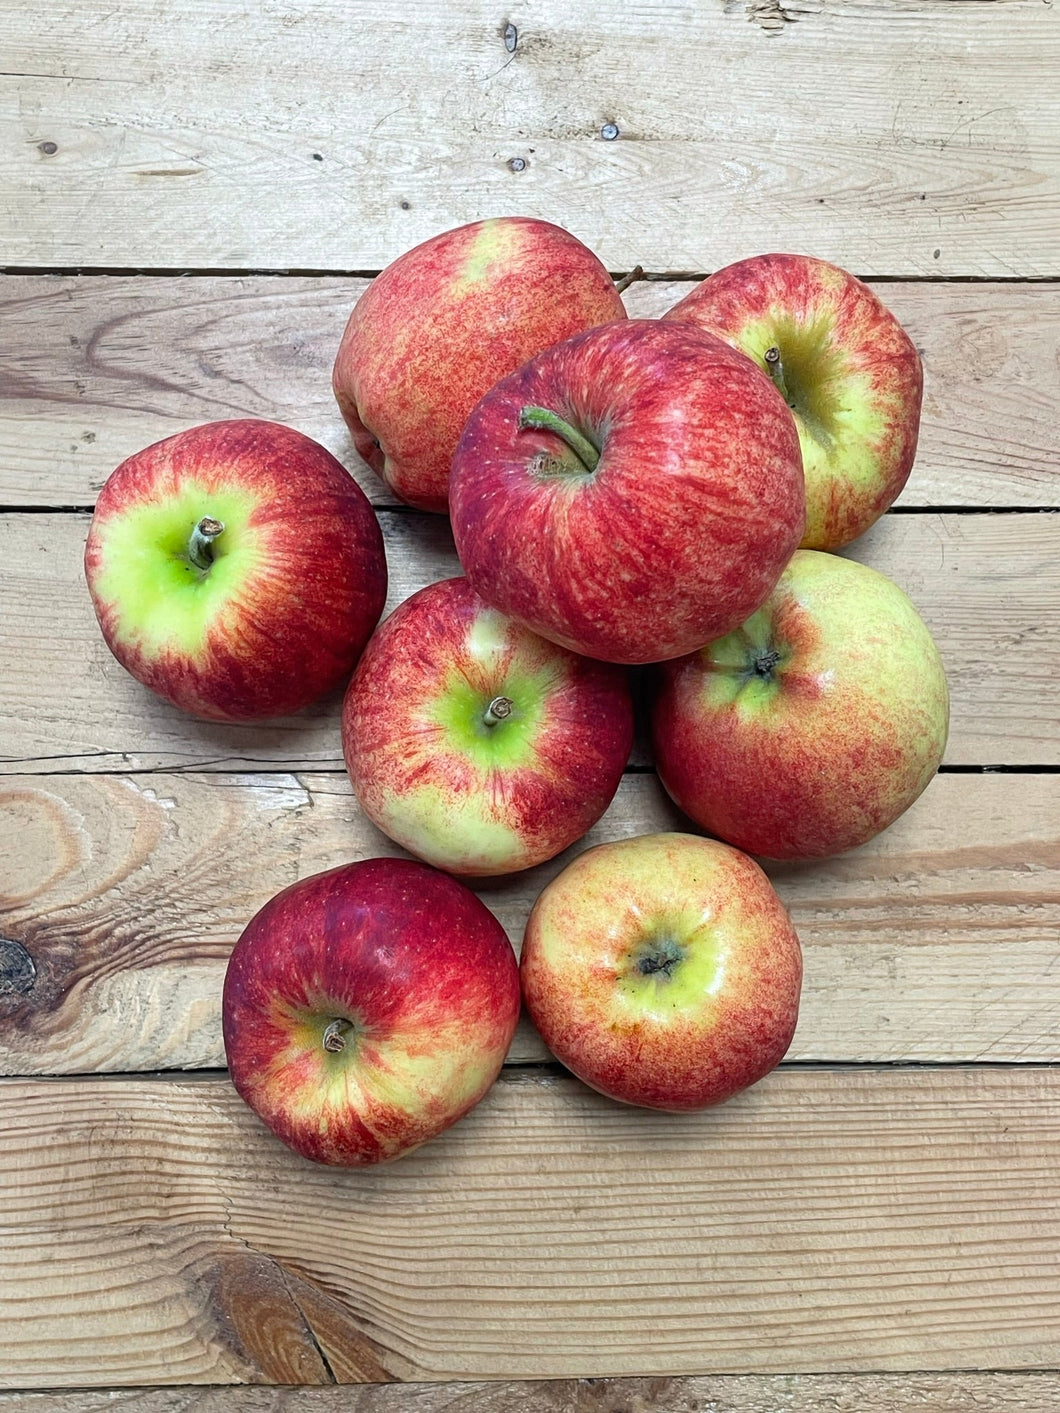 Eating Apples - Organic Delivery Company